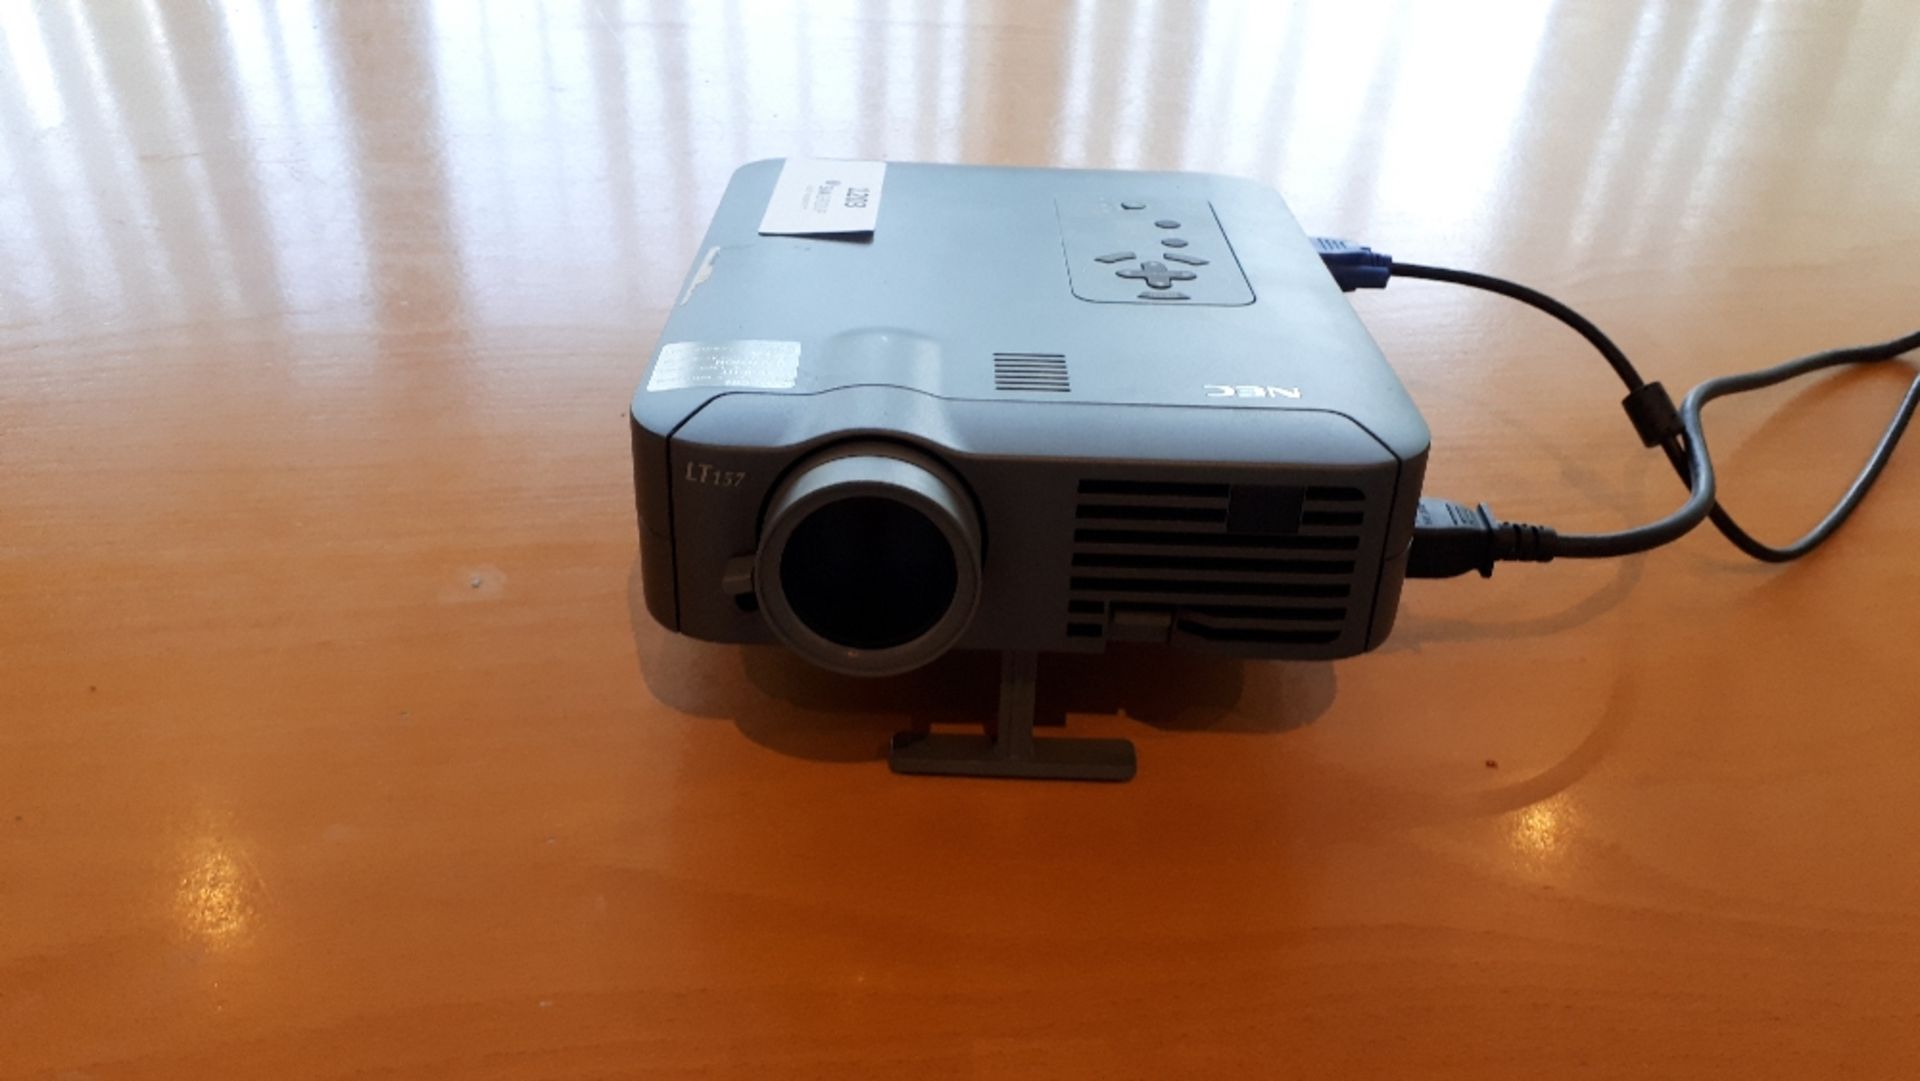 NEC LT157 Projector - Image 2 of 2